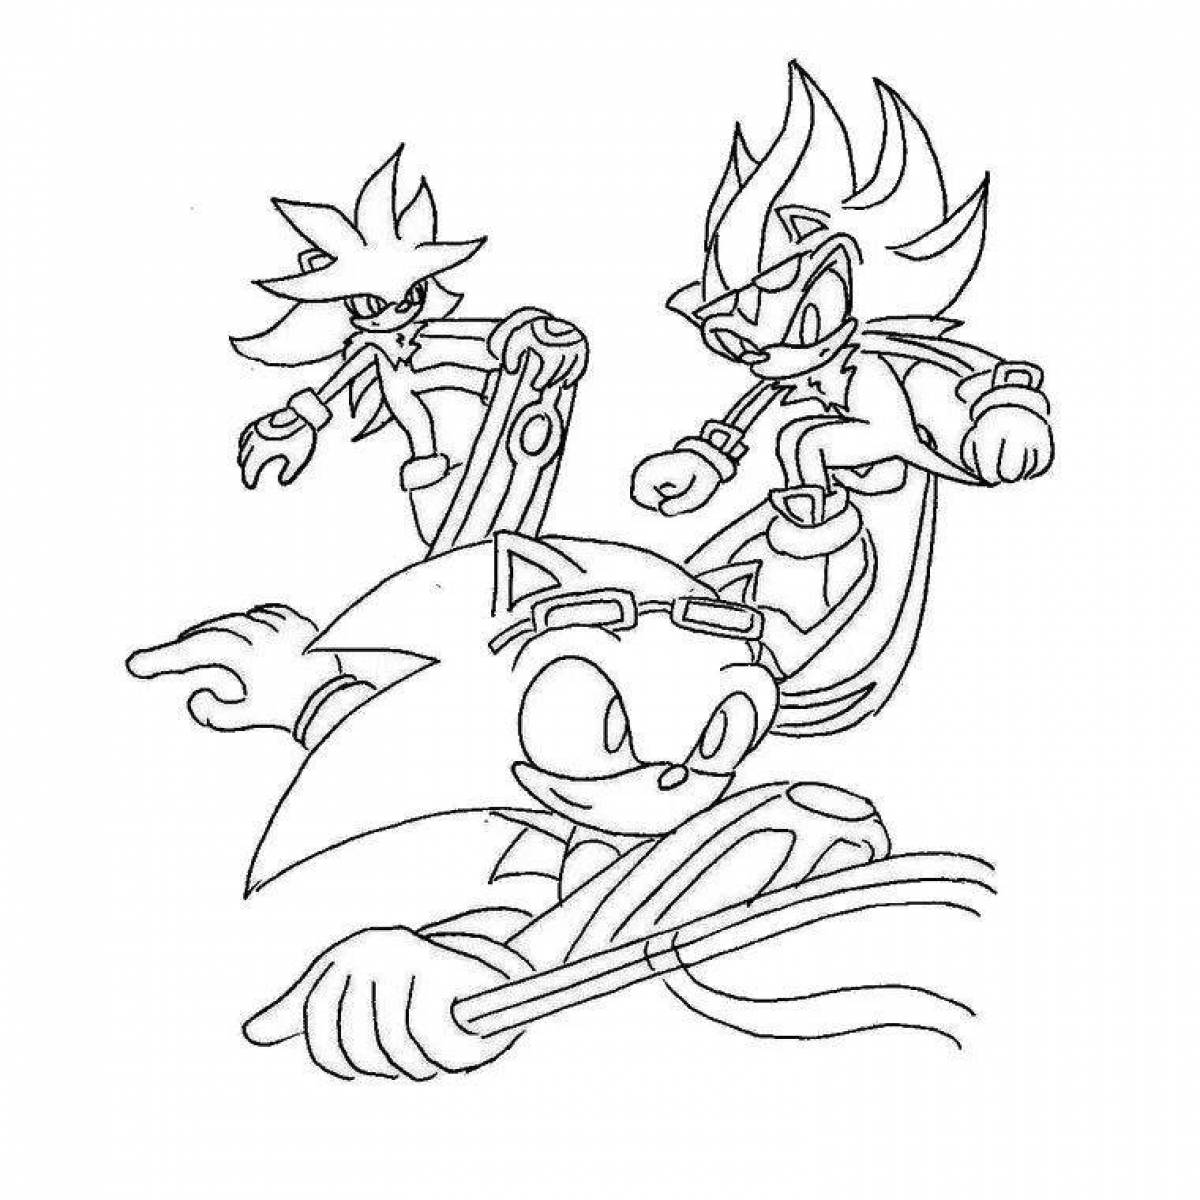 Colorful sonic shadow coloring page